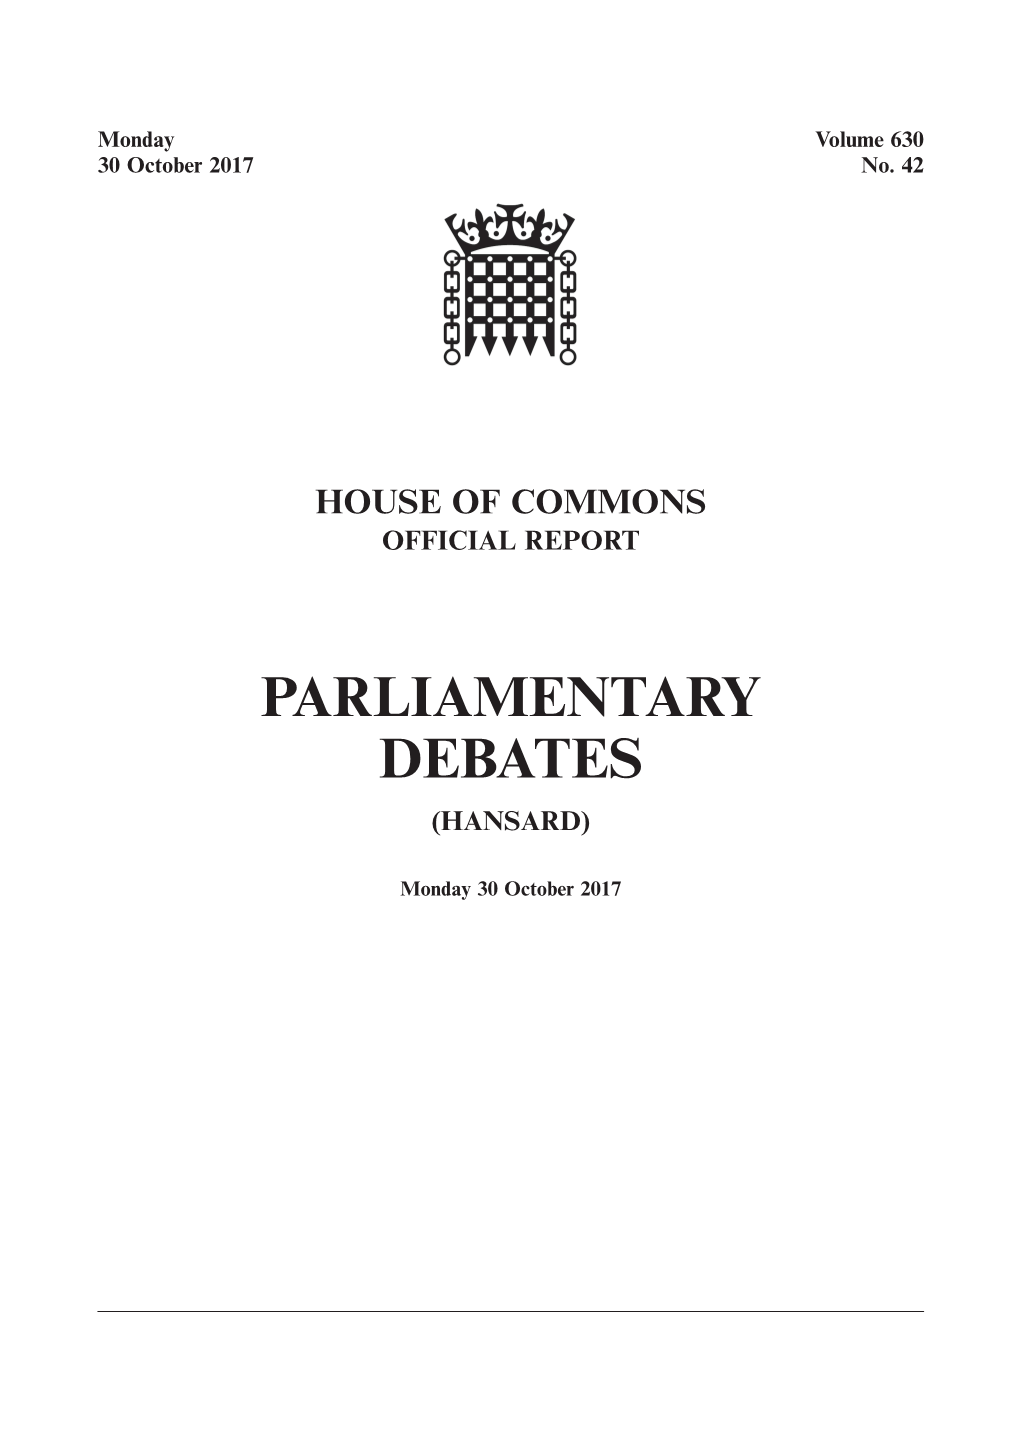 Whole Day Download the Hansard Record of the Entire Day in PDF Format. PDF File, 0.98